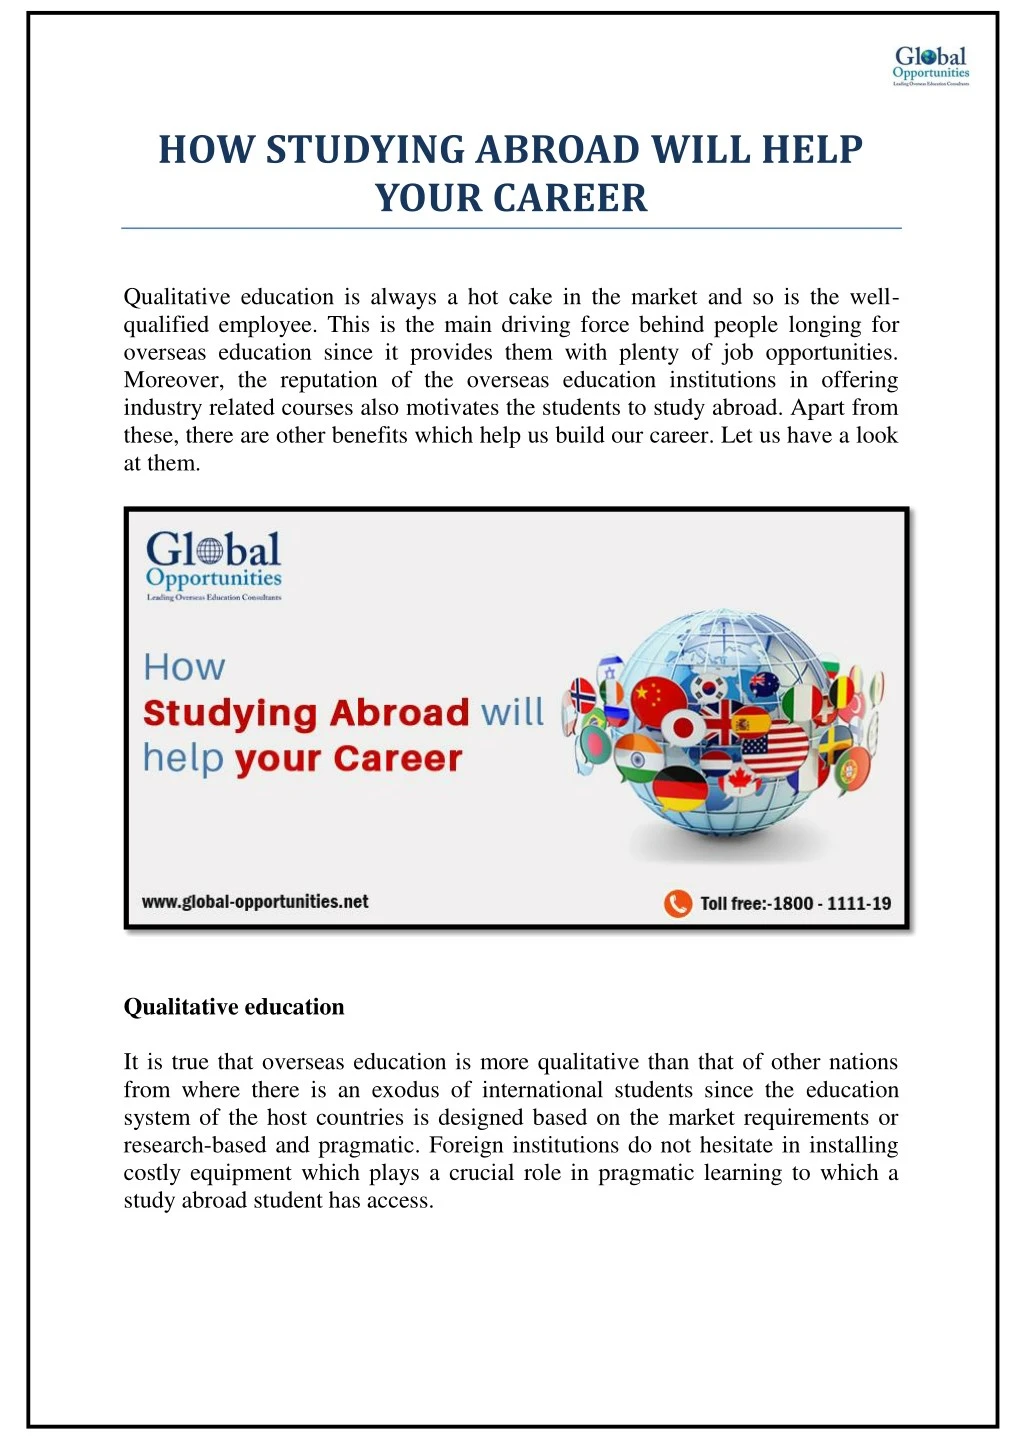 how studying abroad will help your career